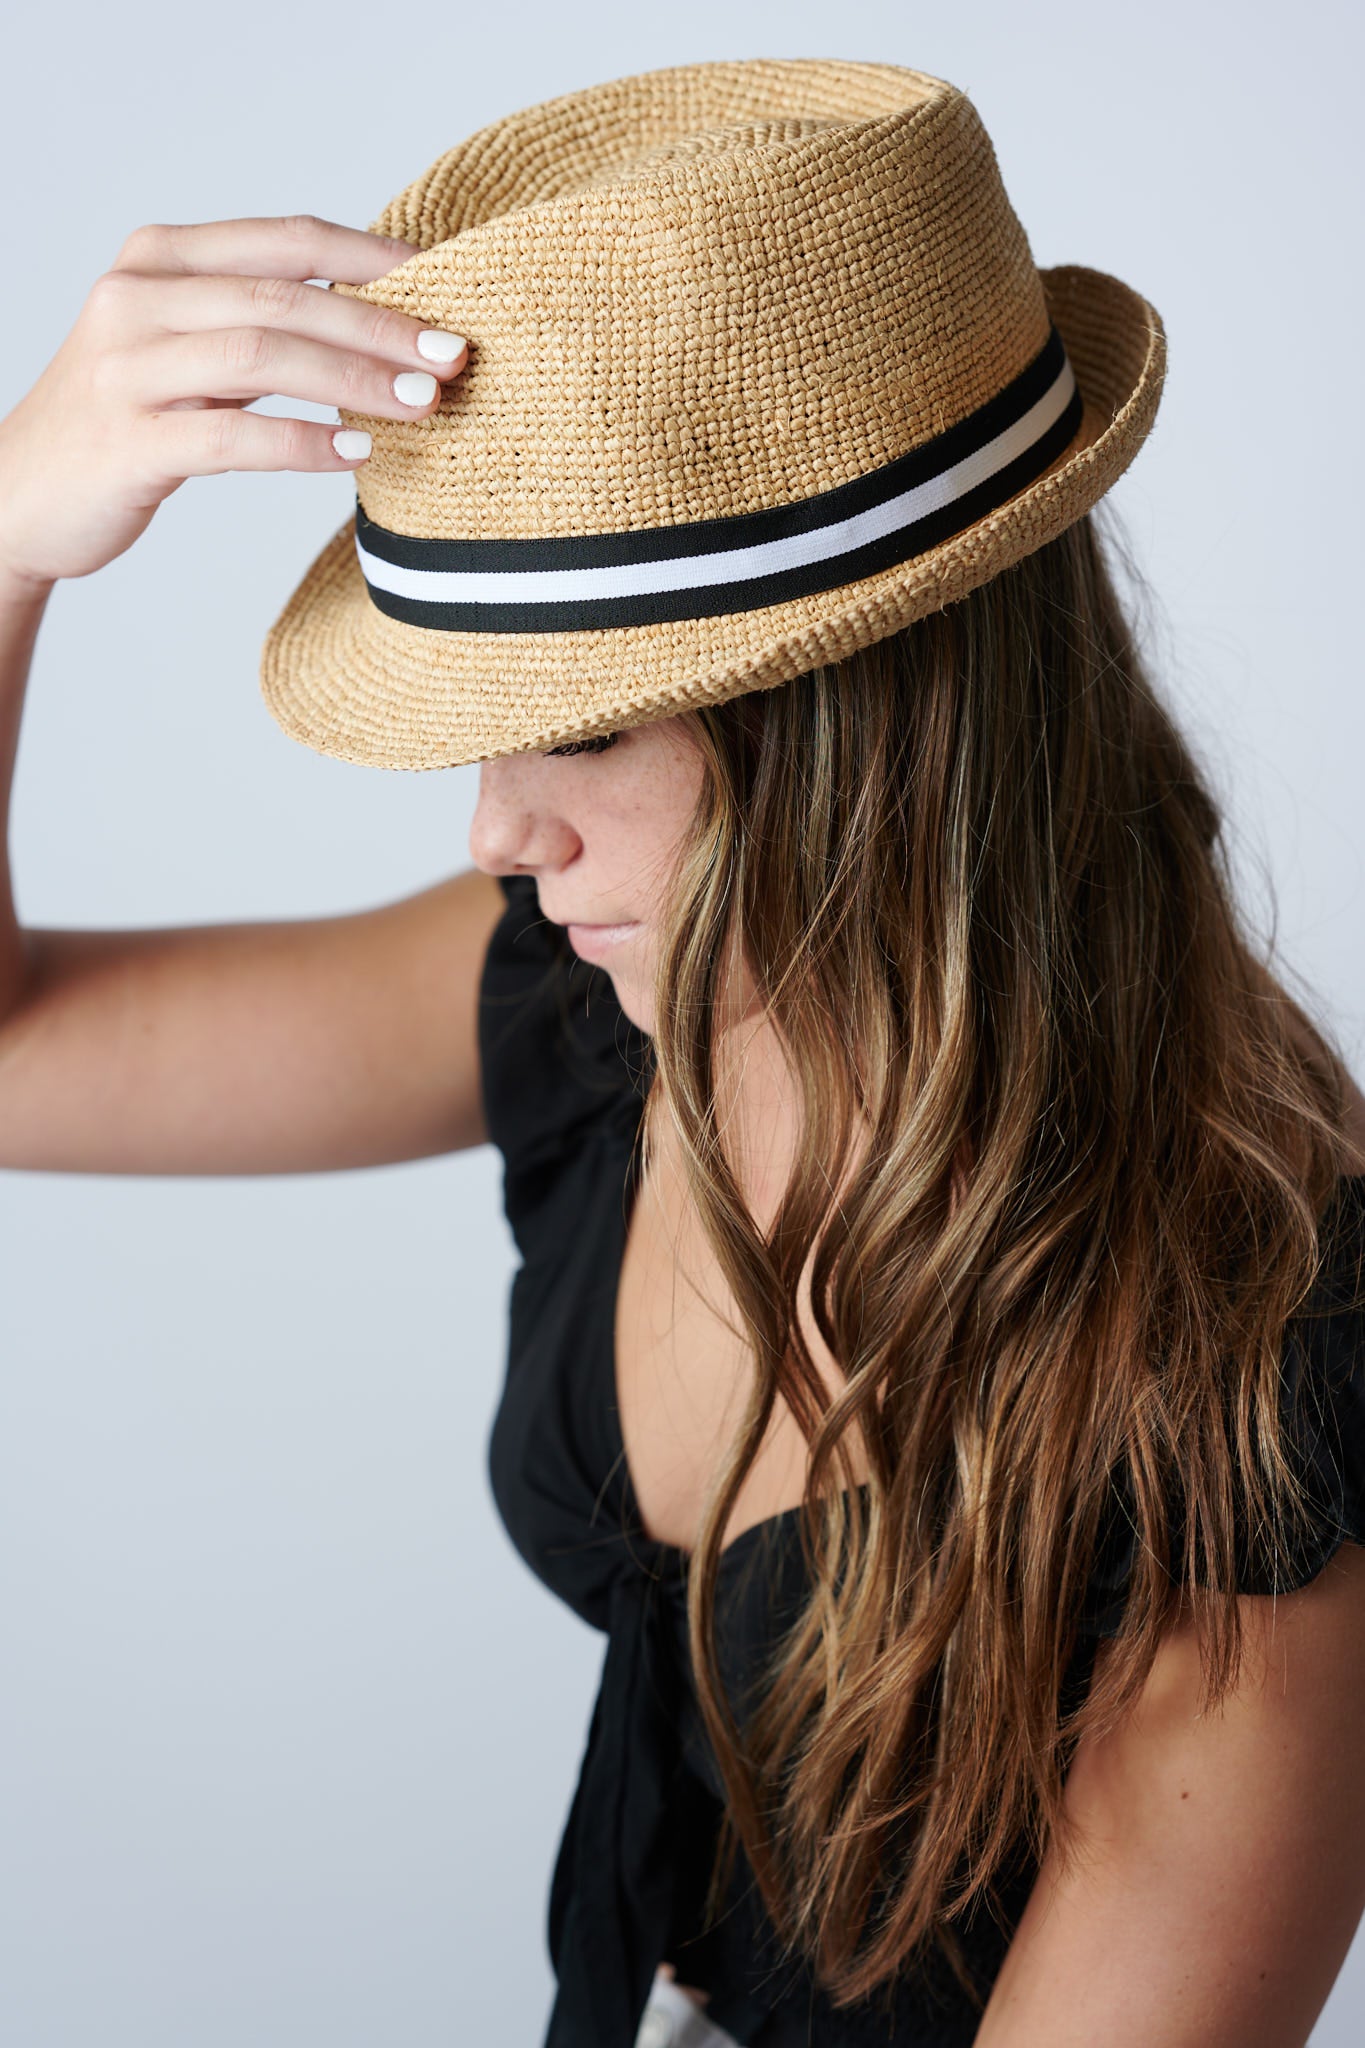 Person wearing natural colored crochet straw fedora hat with black & white stripe band.